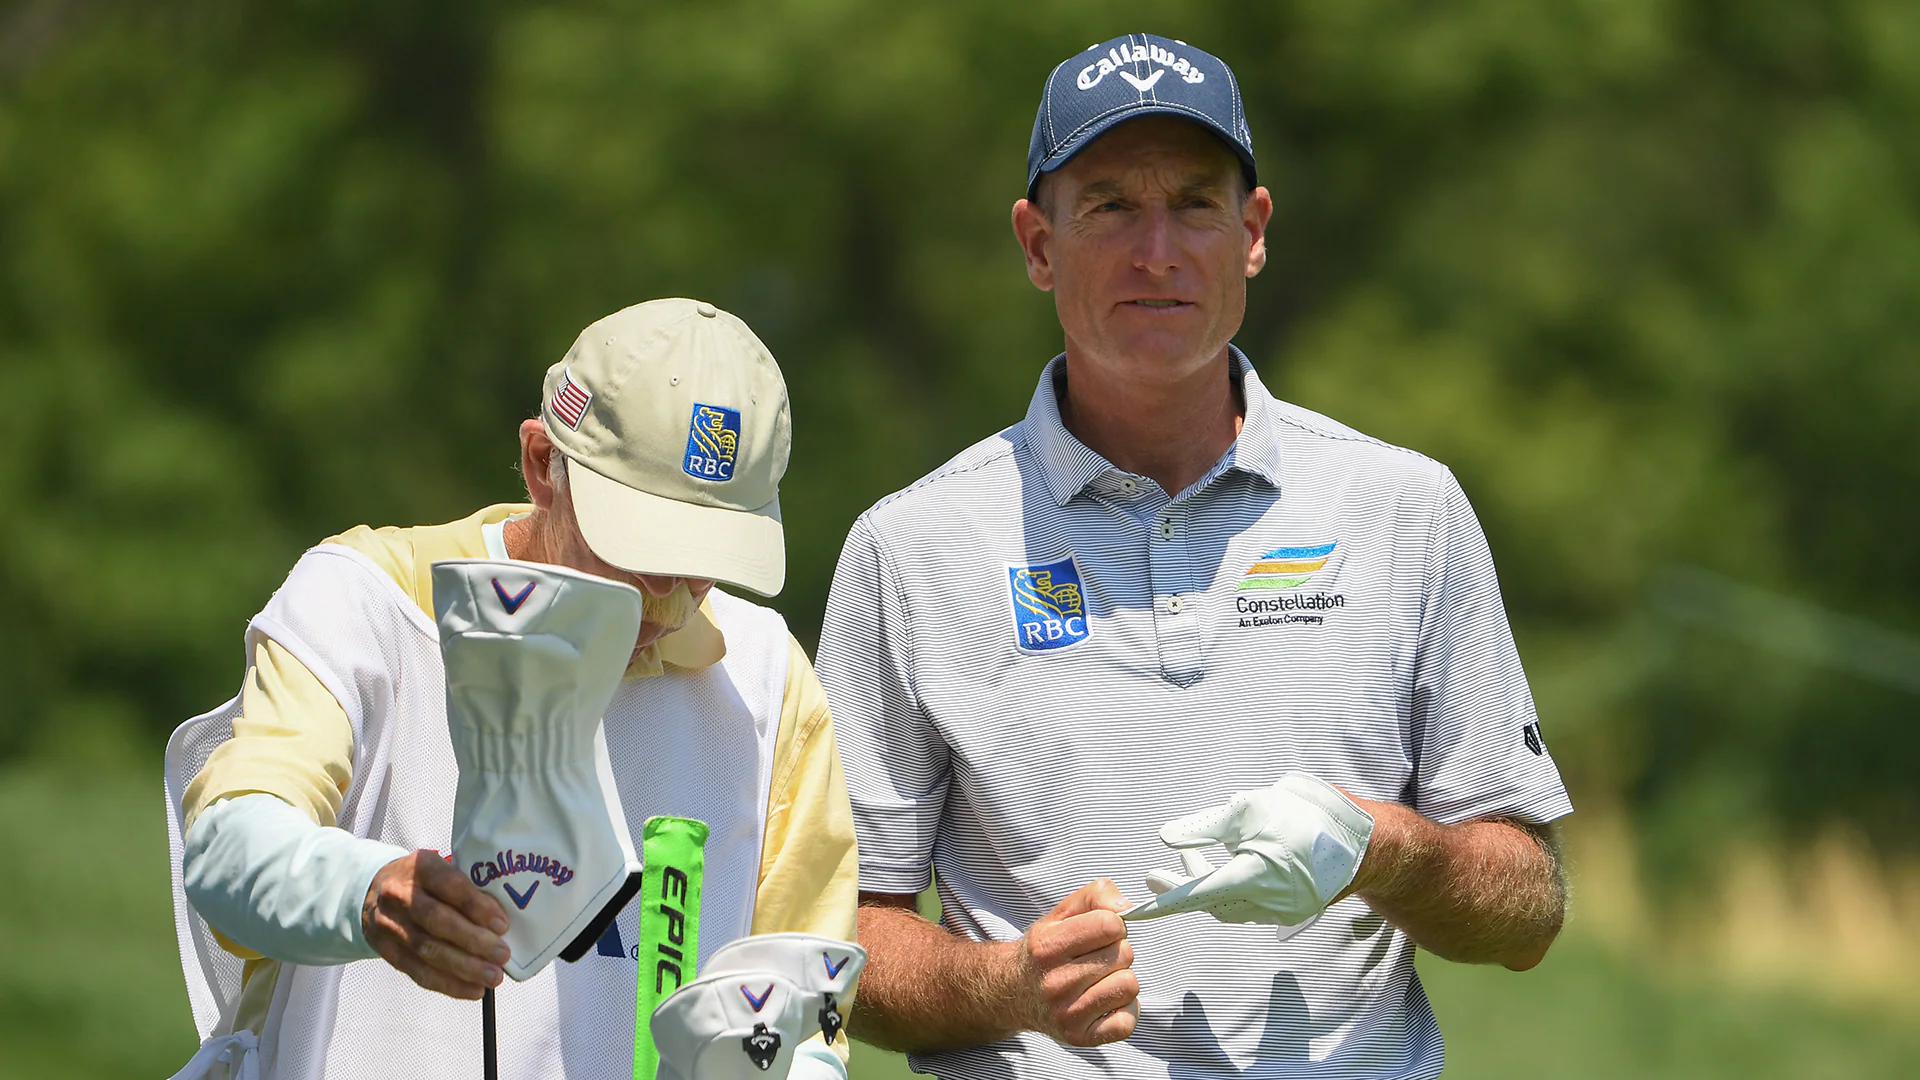 Jim Furyk’s 64 exception to morning rule Friday at U.S. Senior Open